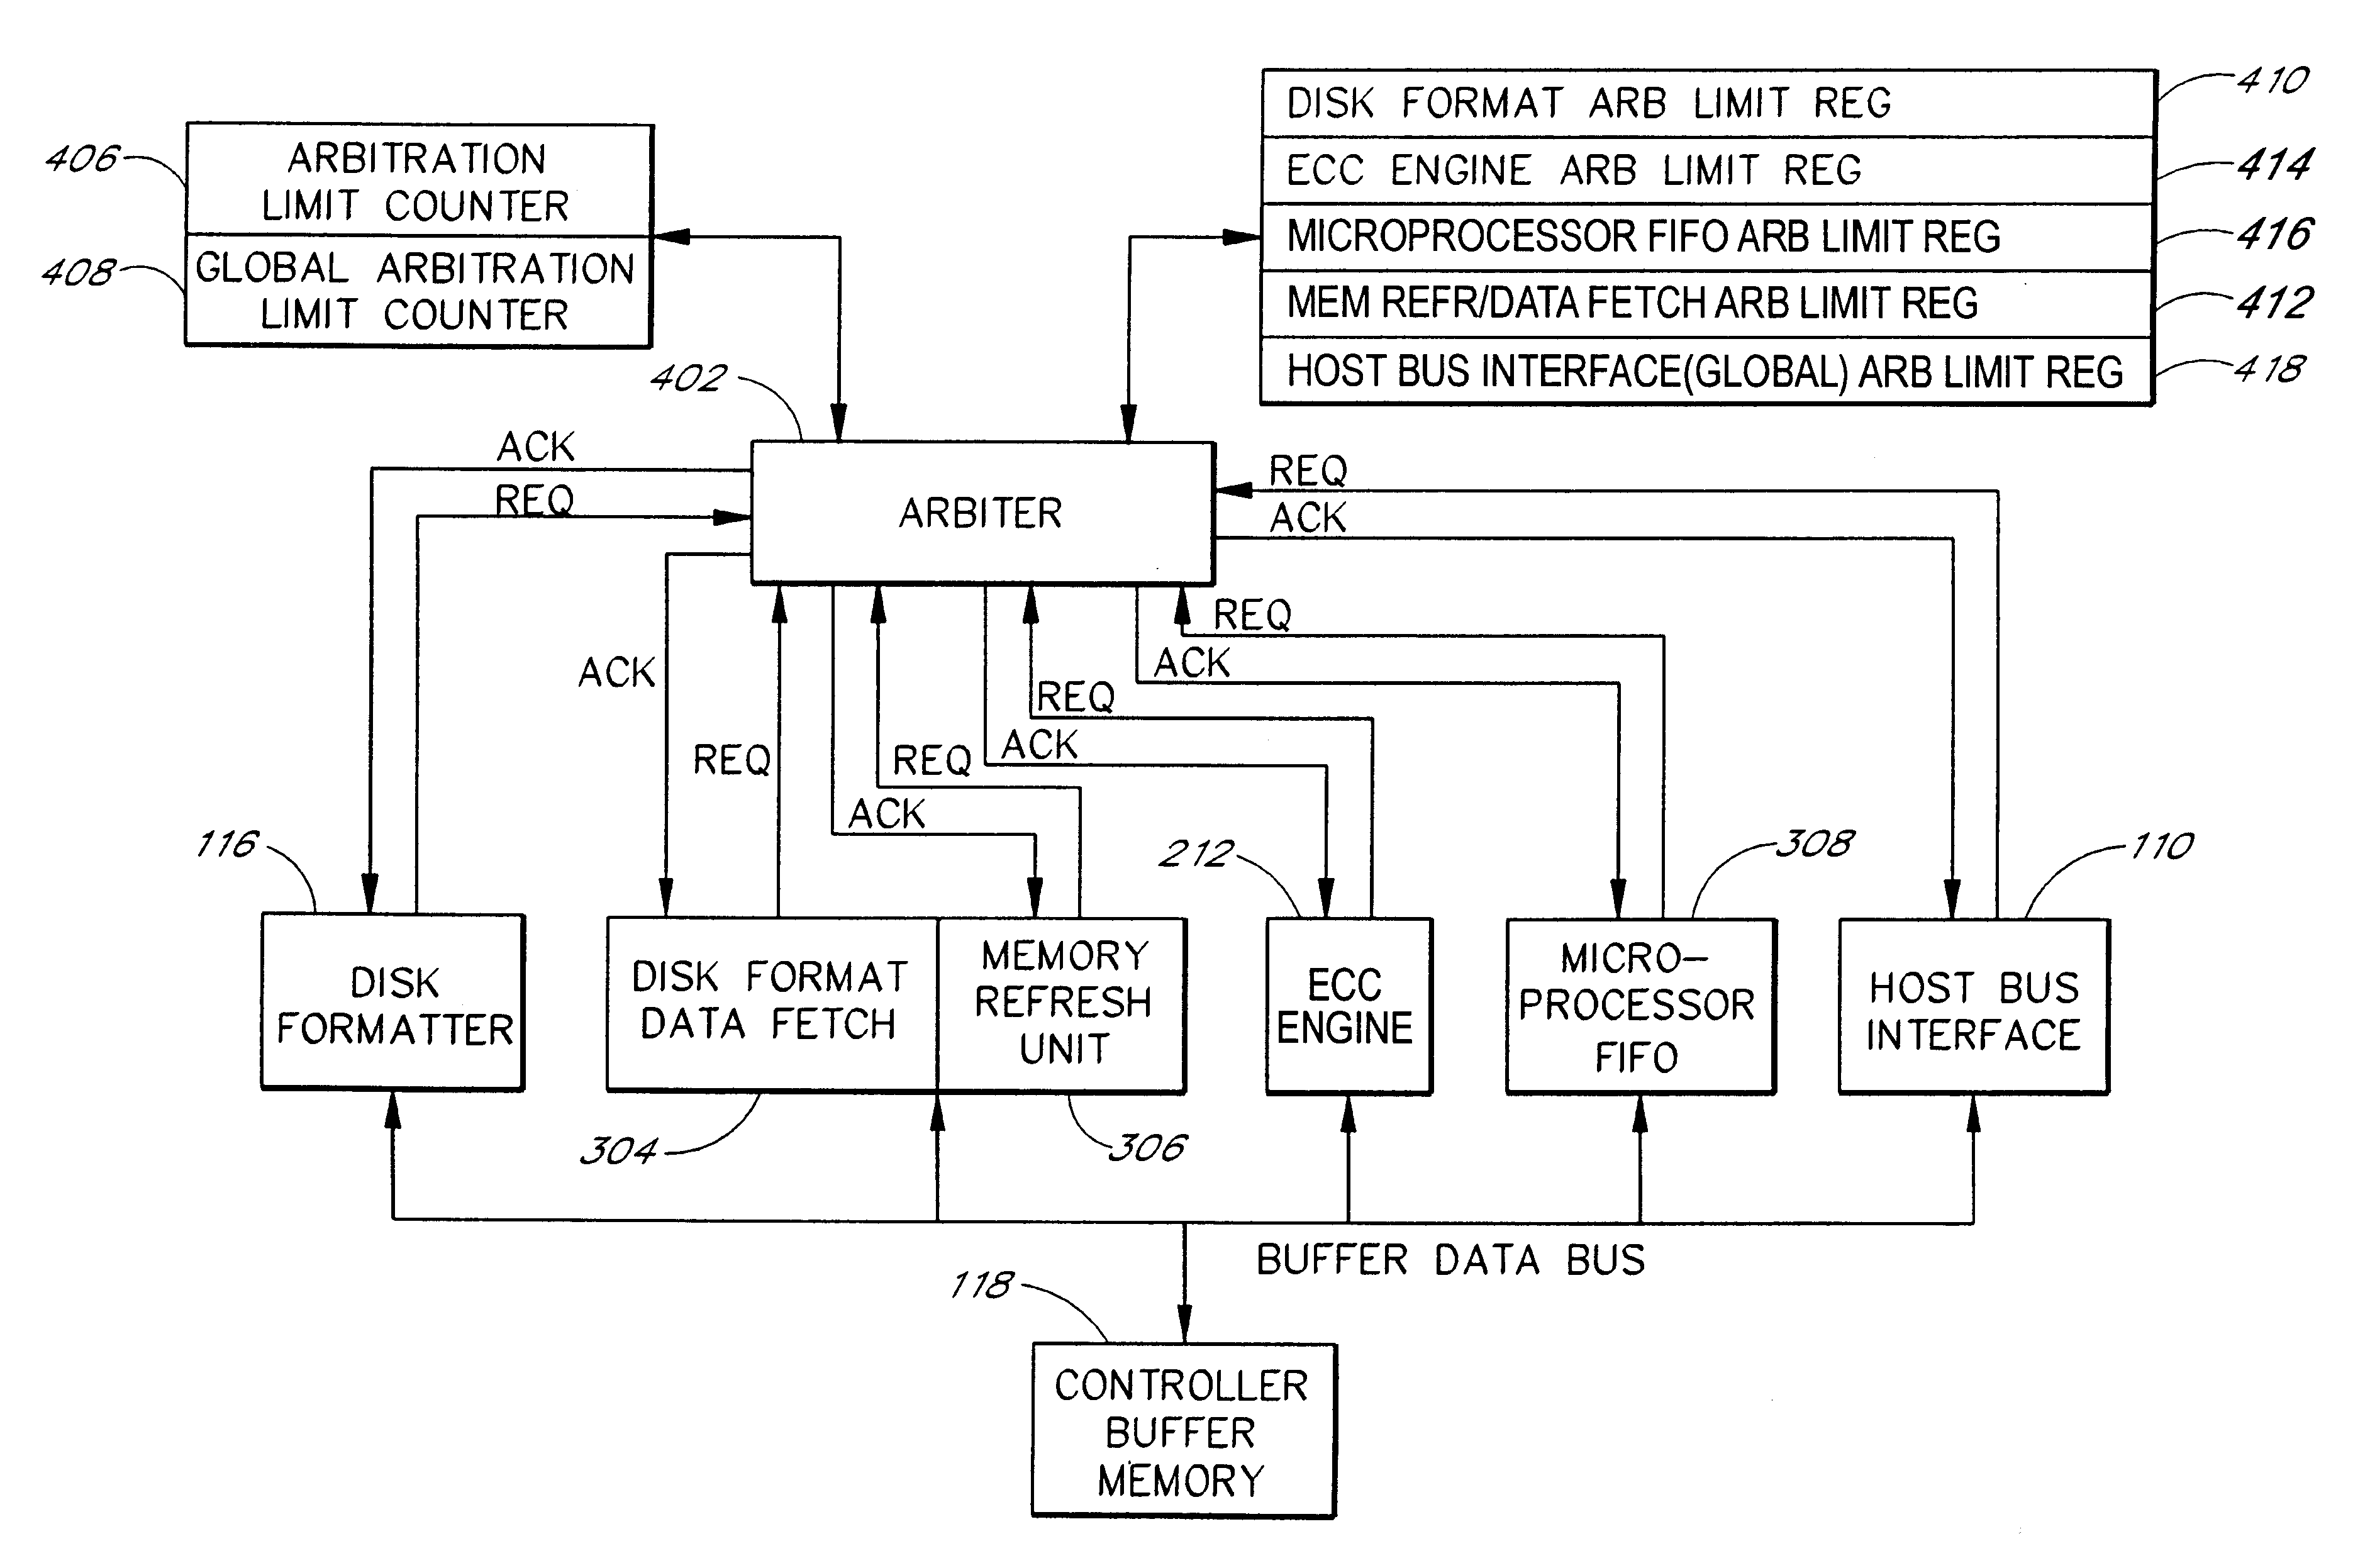 Methods and systems for arbitrating access to a disk controller buffer memory by allocating various amounts of times to different accessing units